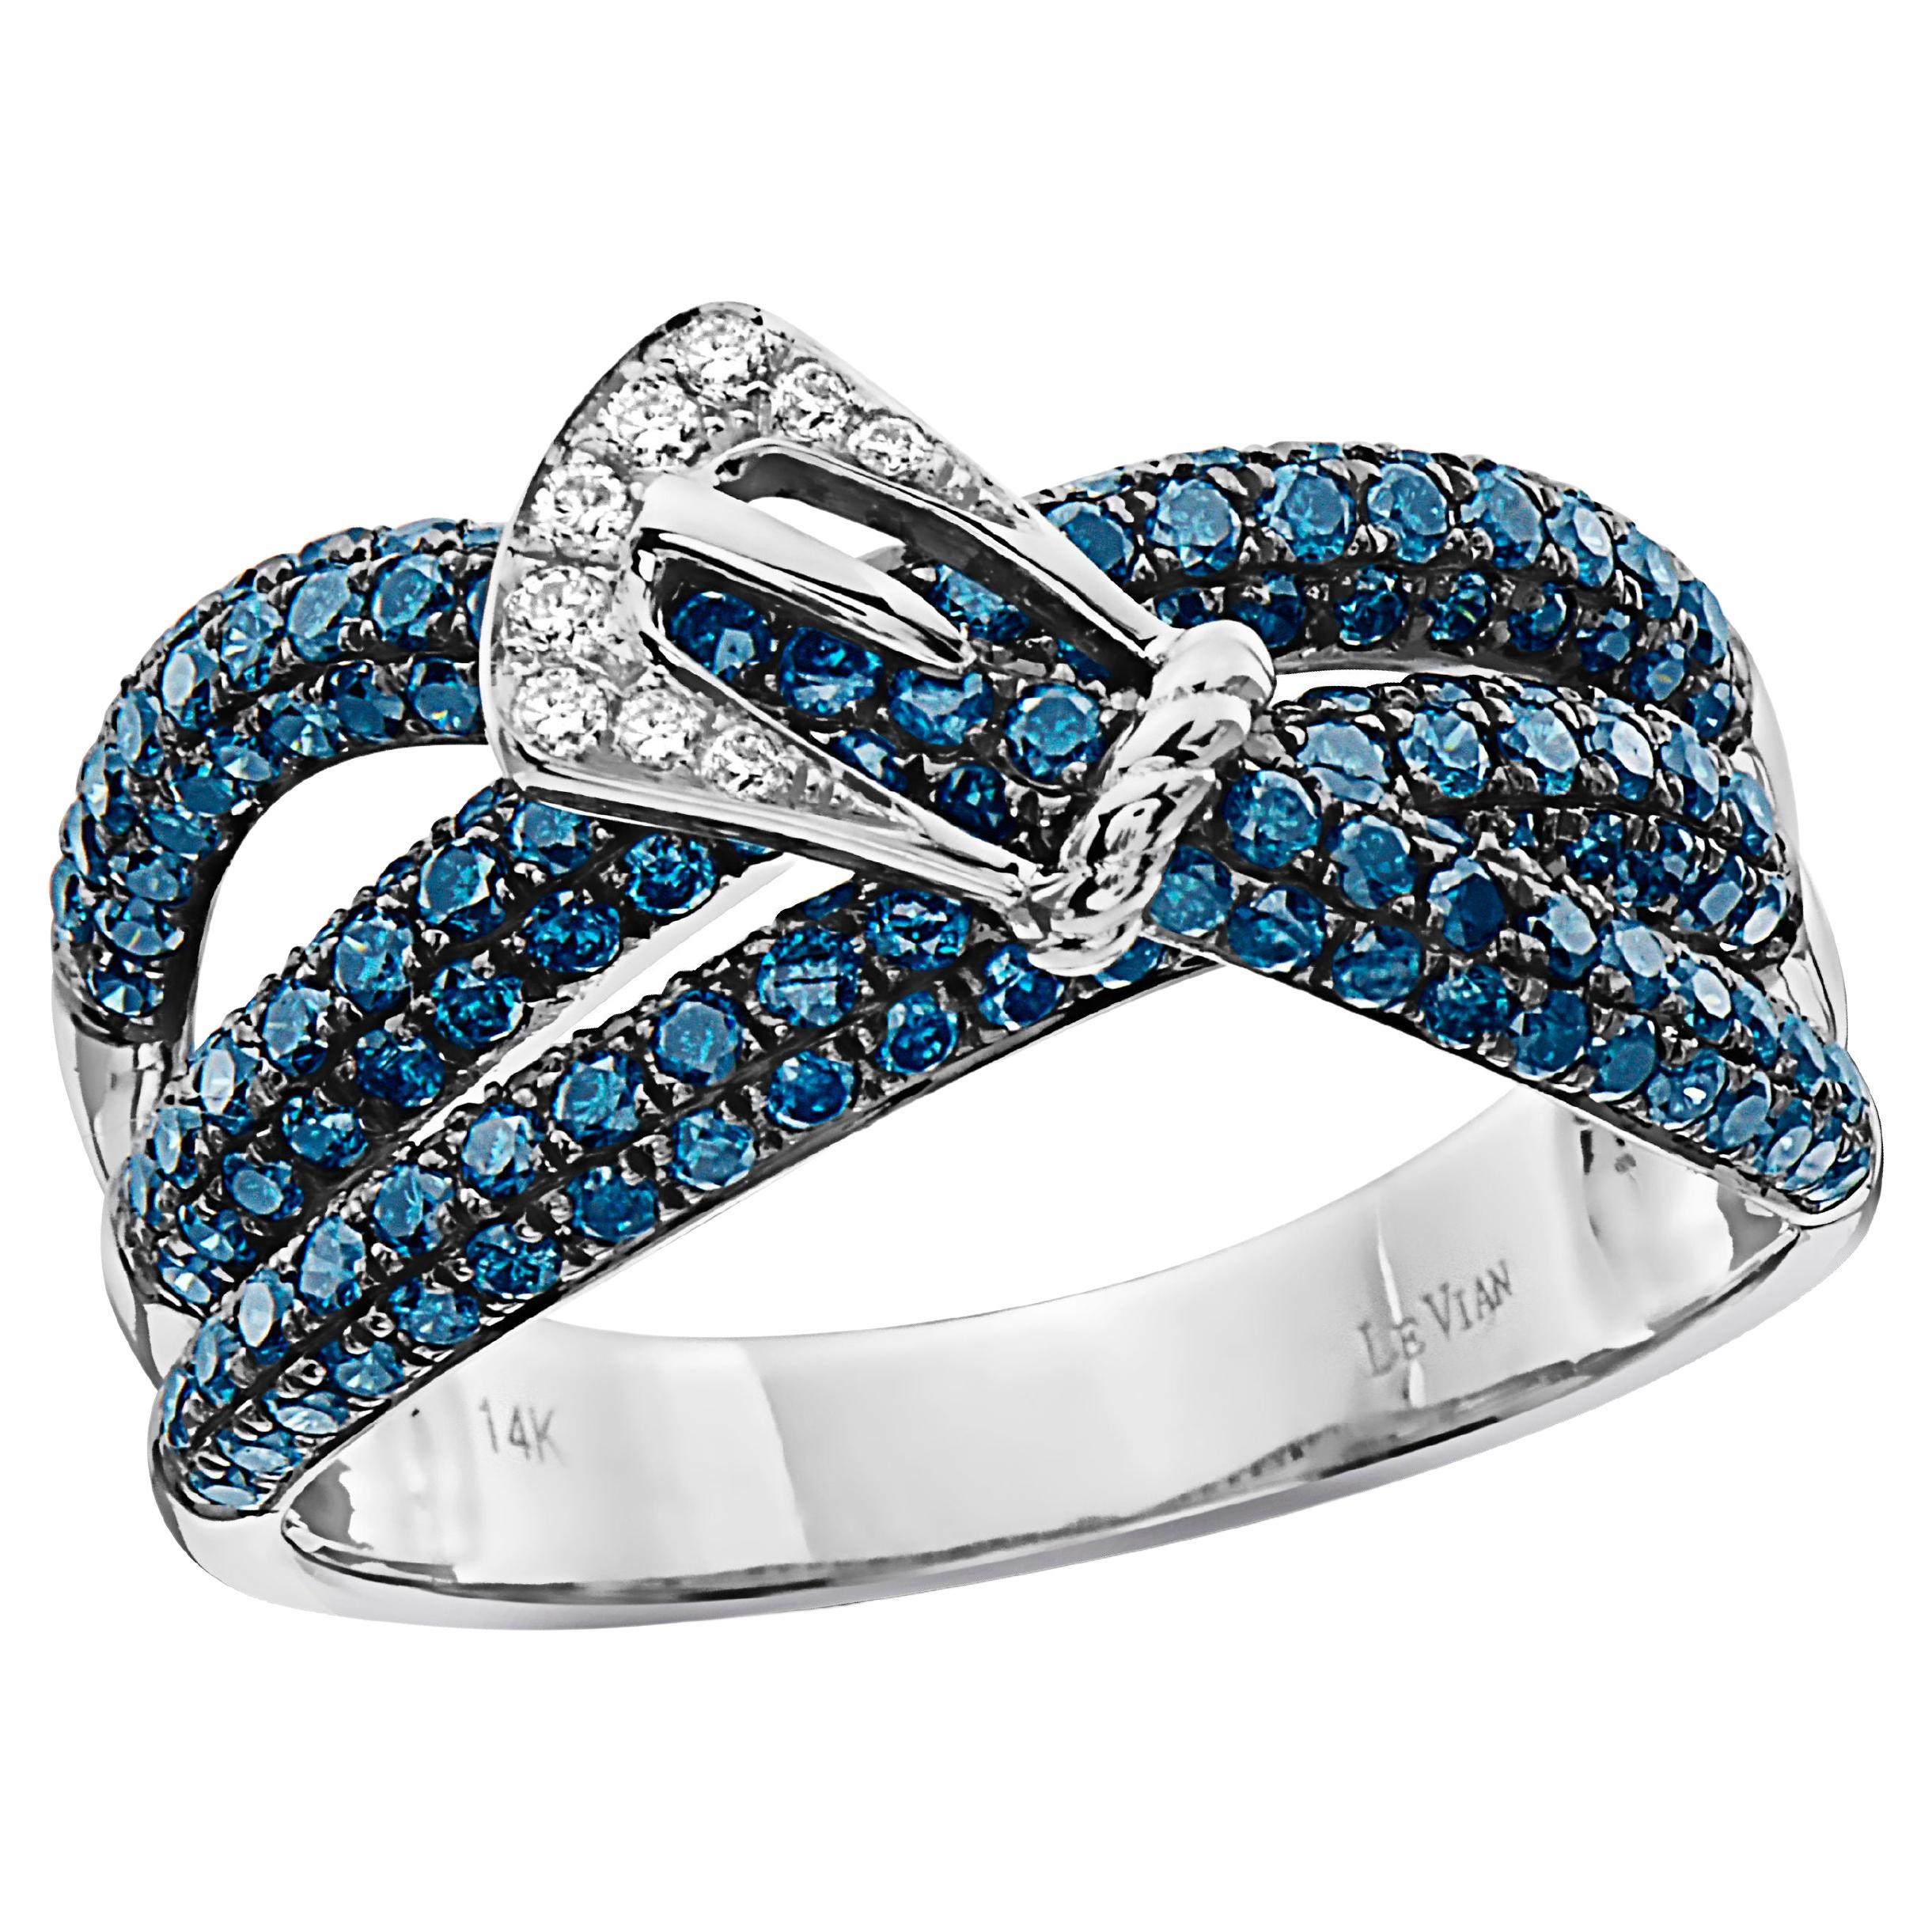 Grand Sample Sale Ring 1 1/8 Cts Blue and White Natural Diamonds, 14K White Gold For Sale